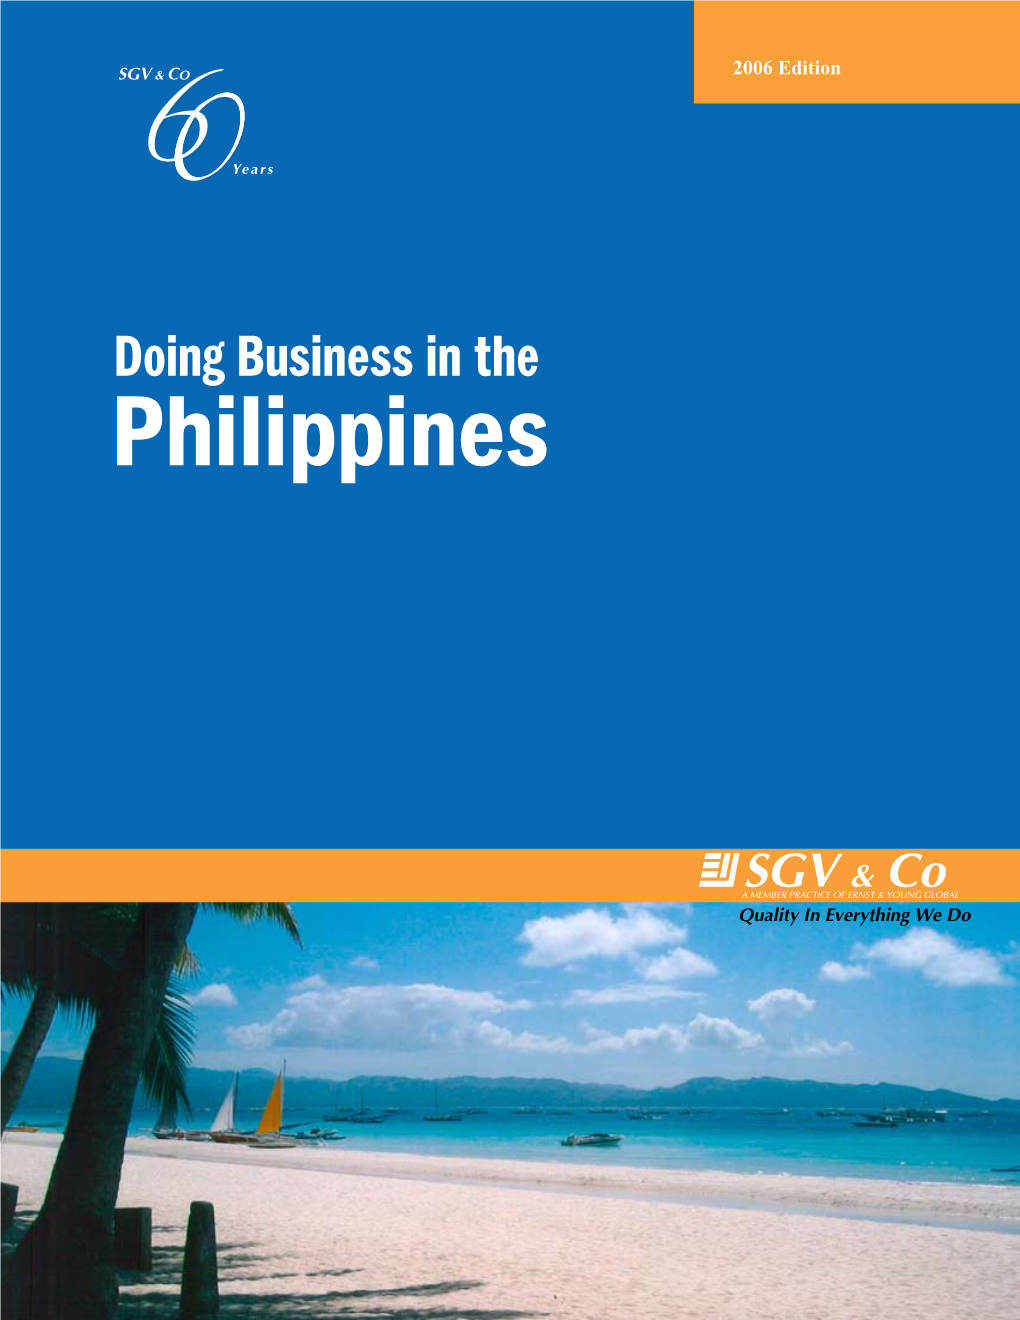 Philippines Ears R a Ye ! 2006 Edition Quality Ineverythingwe Do a MEMBERPRACTICEOFERNST&YOUNG GLOBAL SGV & Co ©2006 SGV & Co